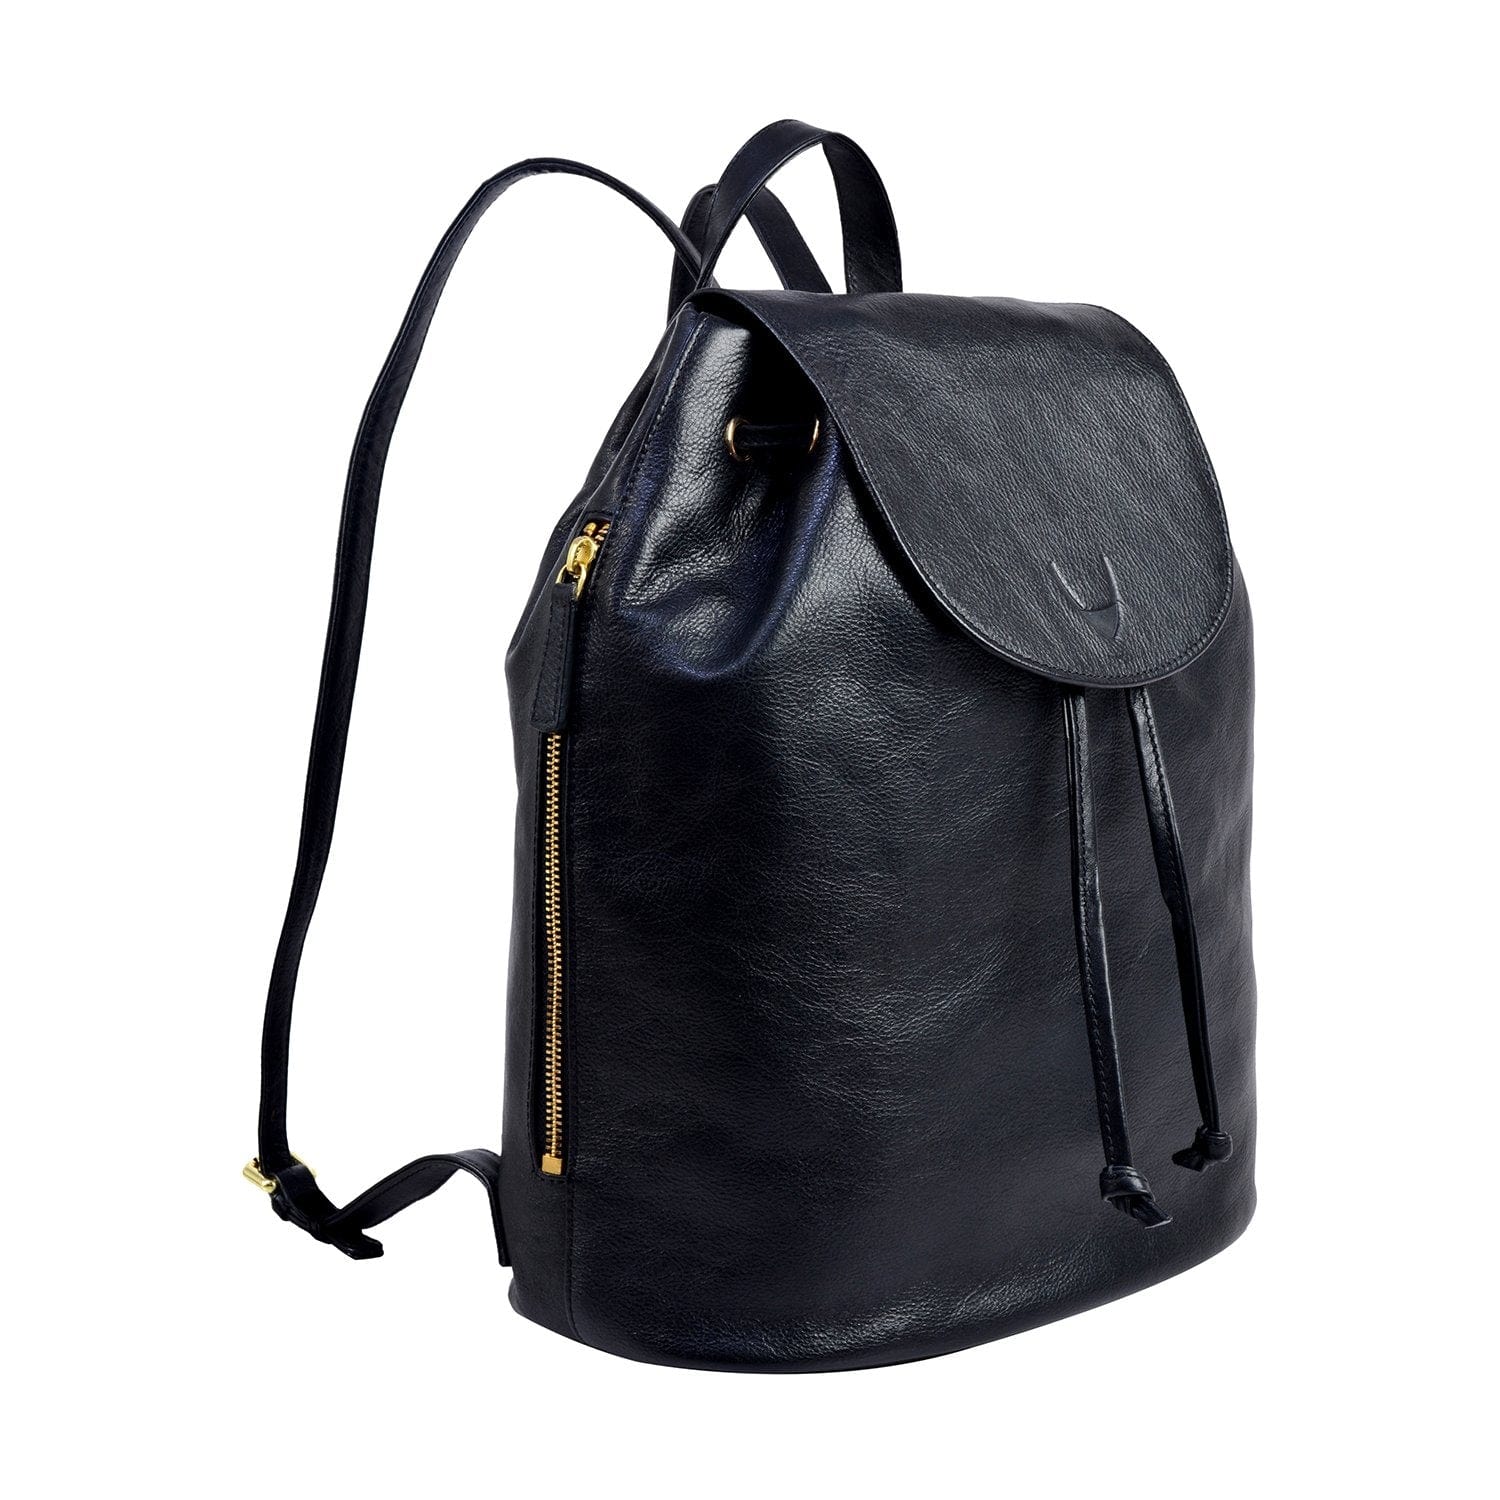 Leah Leather Backpack - Fiori - Products and Ideas For Creating A ...